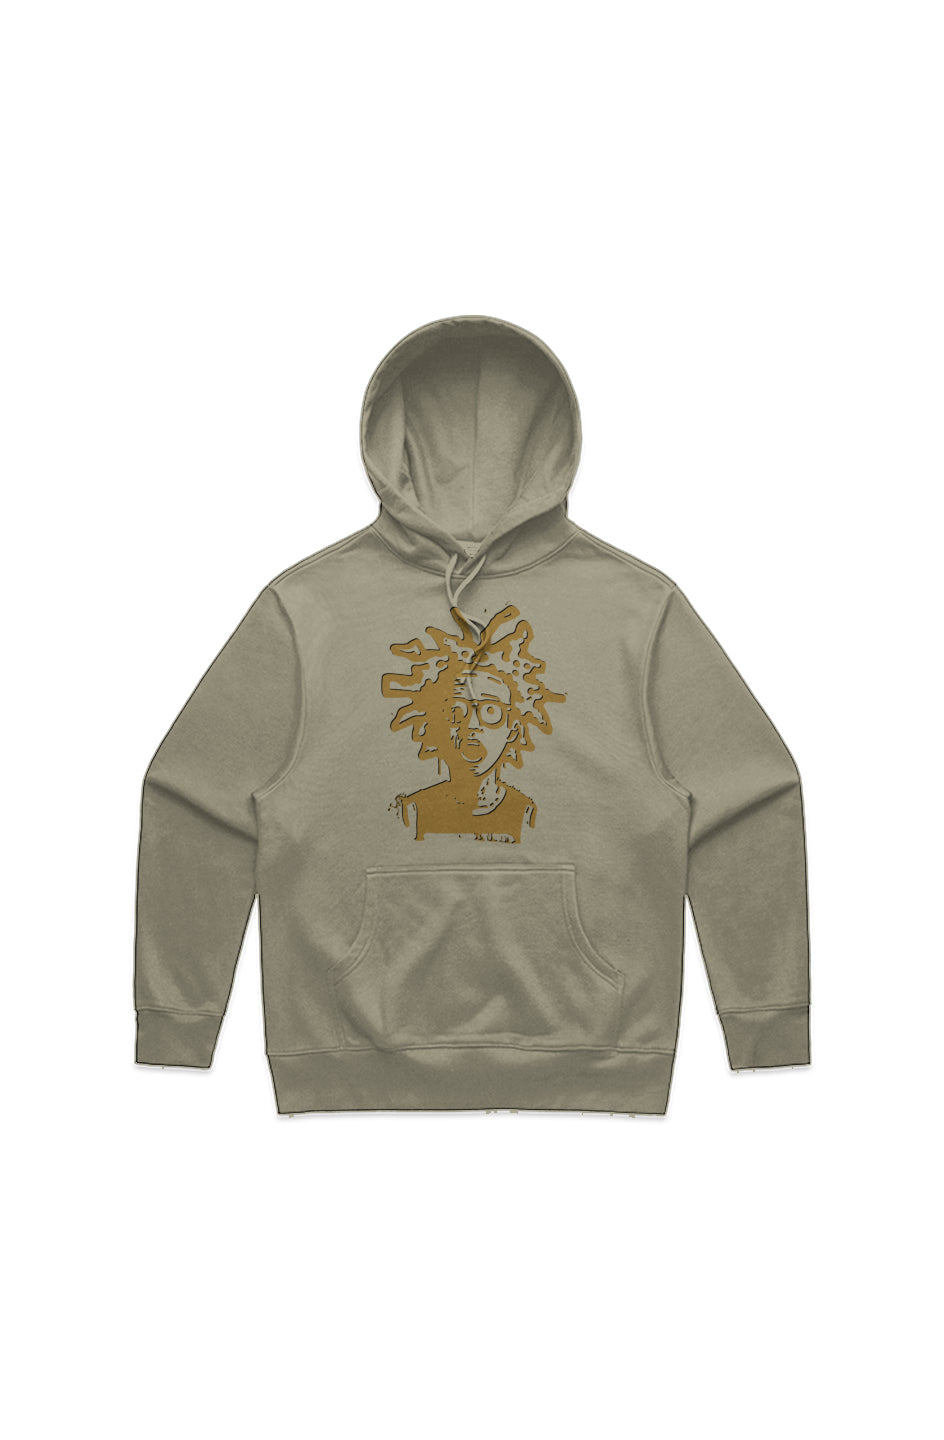 Men's DuGamii Limited Edition Basquiat Inspired Hoodie